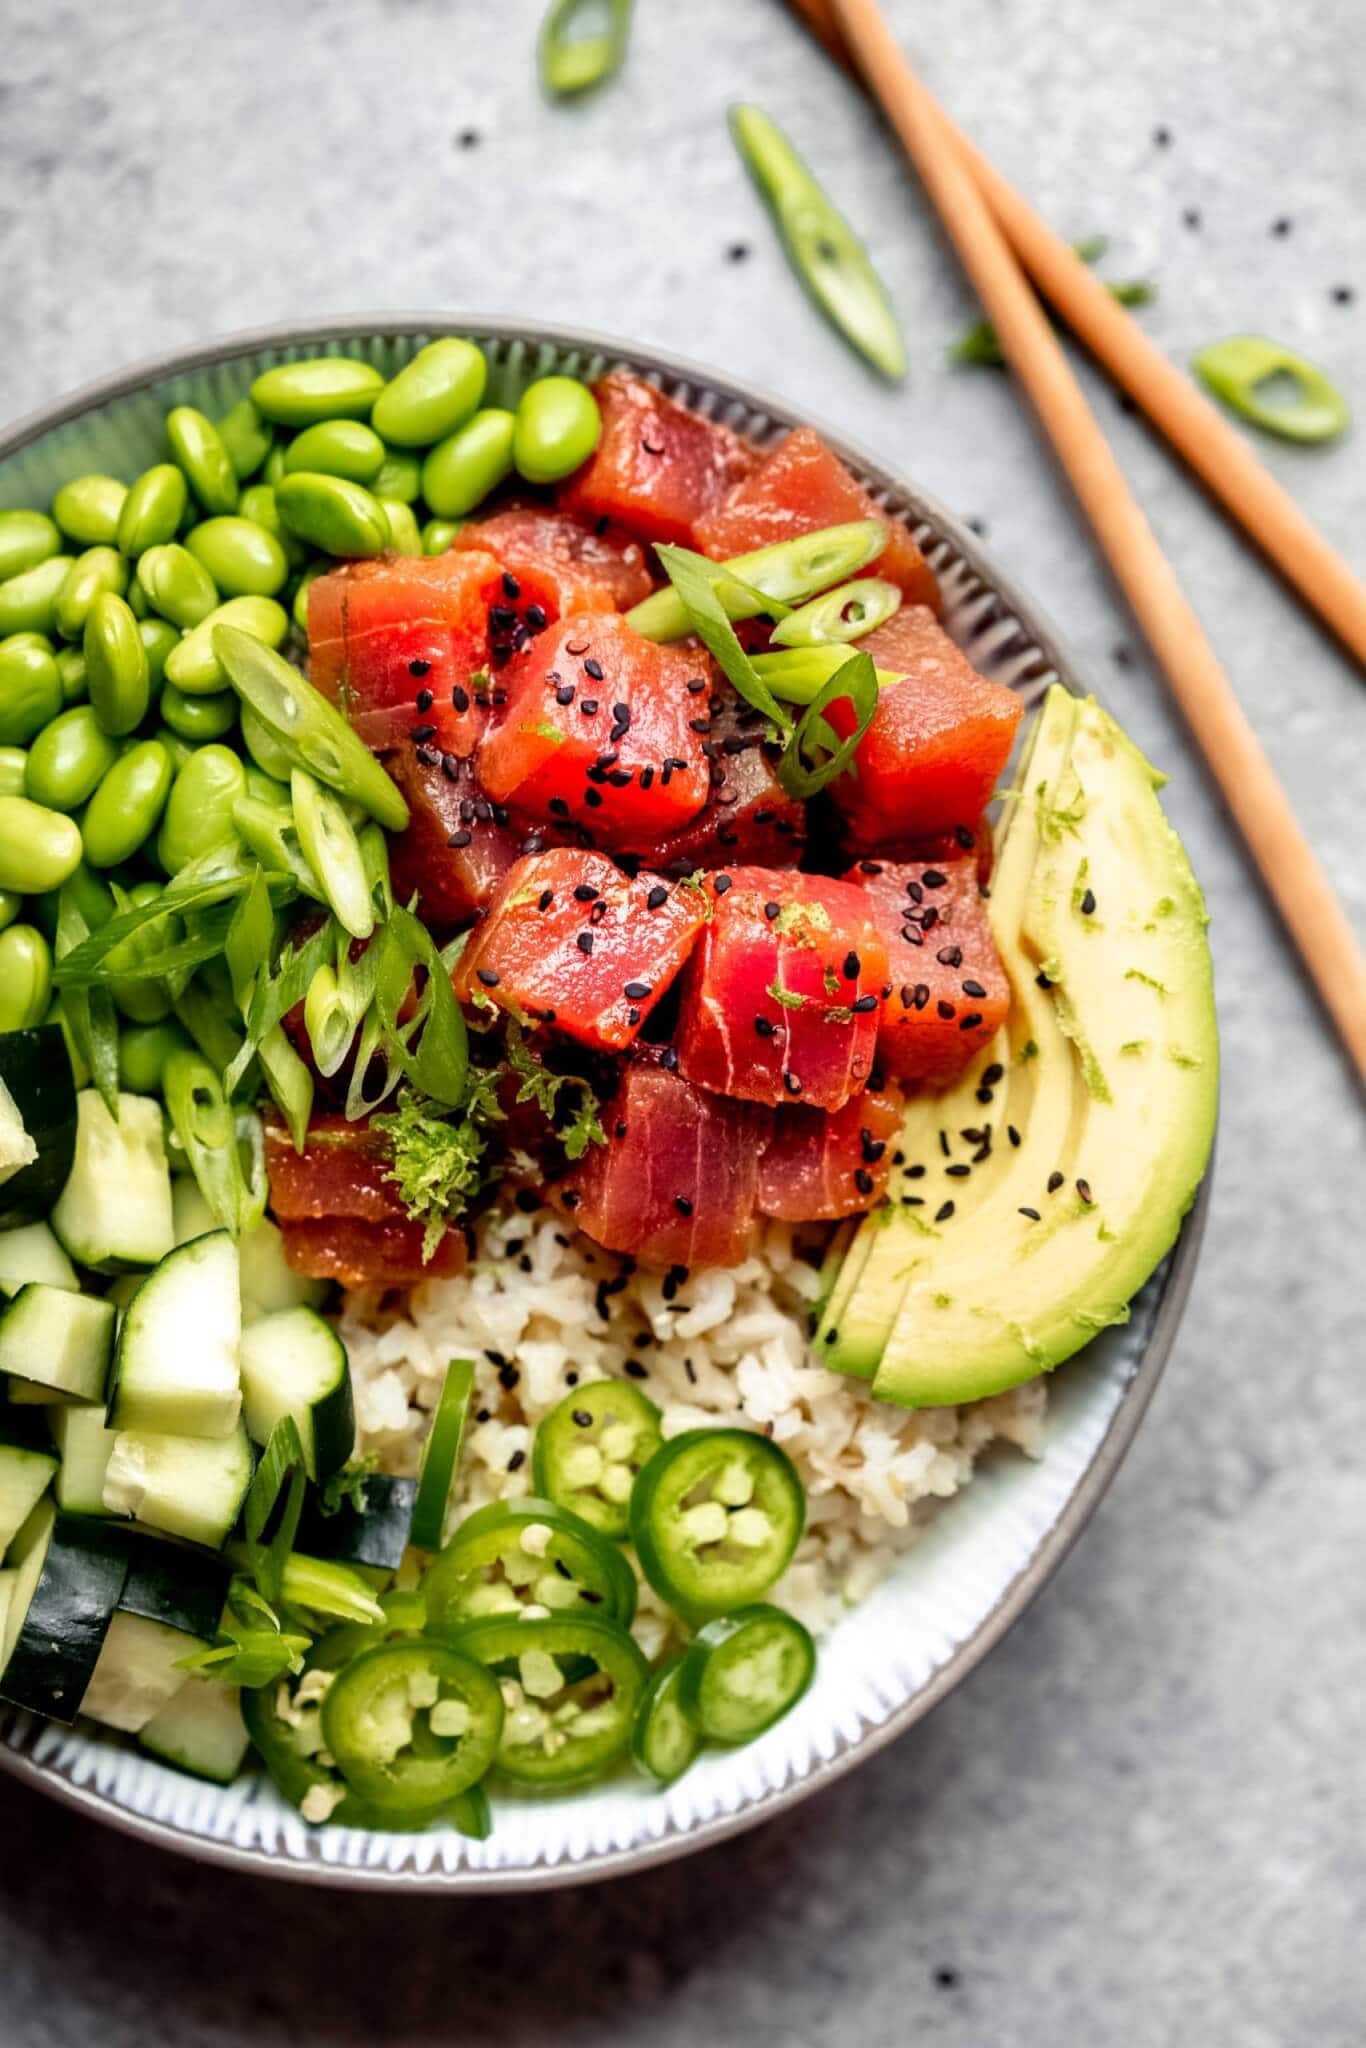 Assembled poke bowl topped with avocado, edamame, jalapeno and cucumbers.